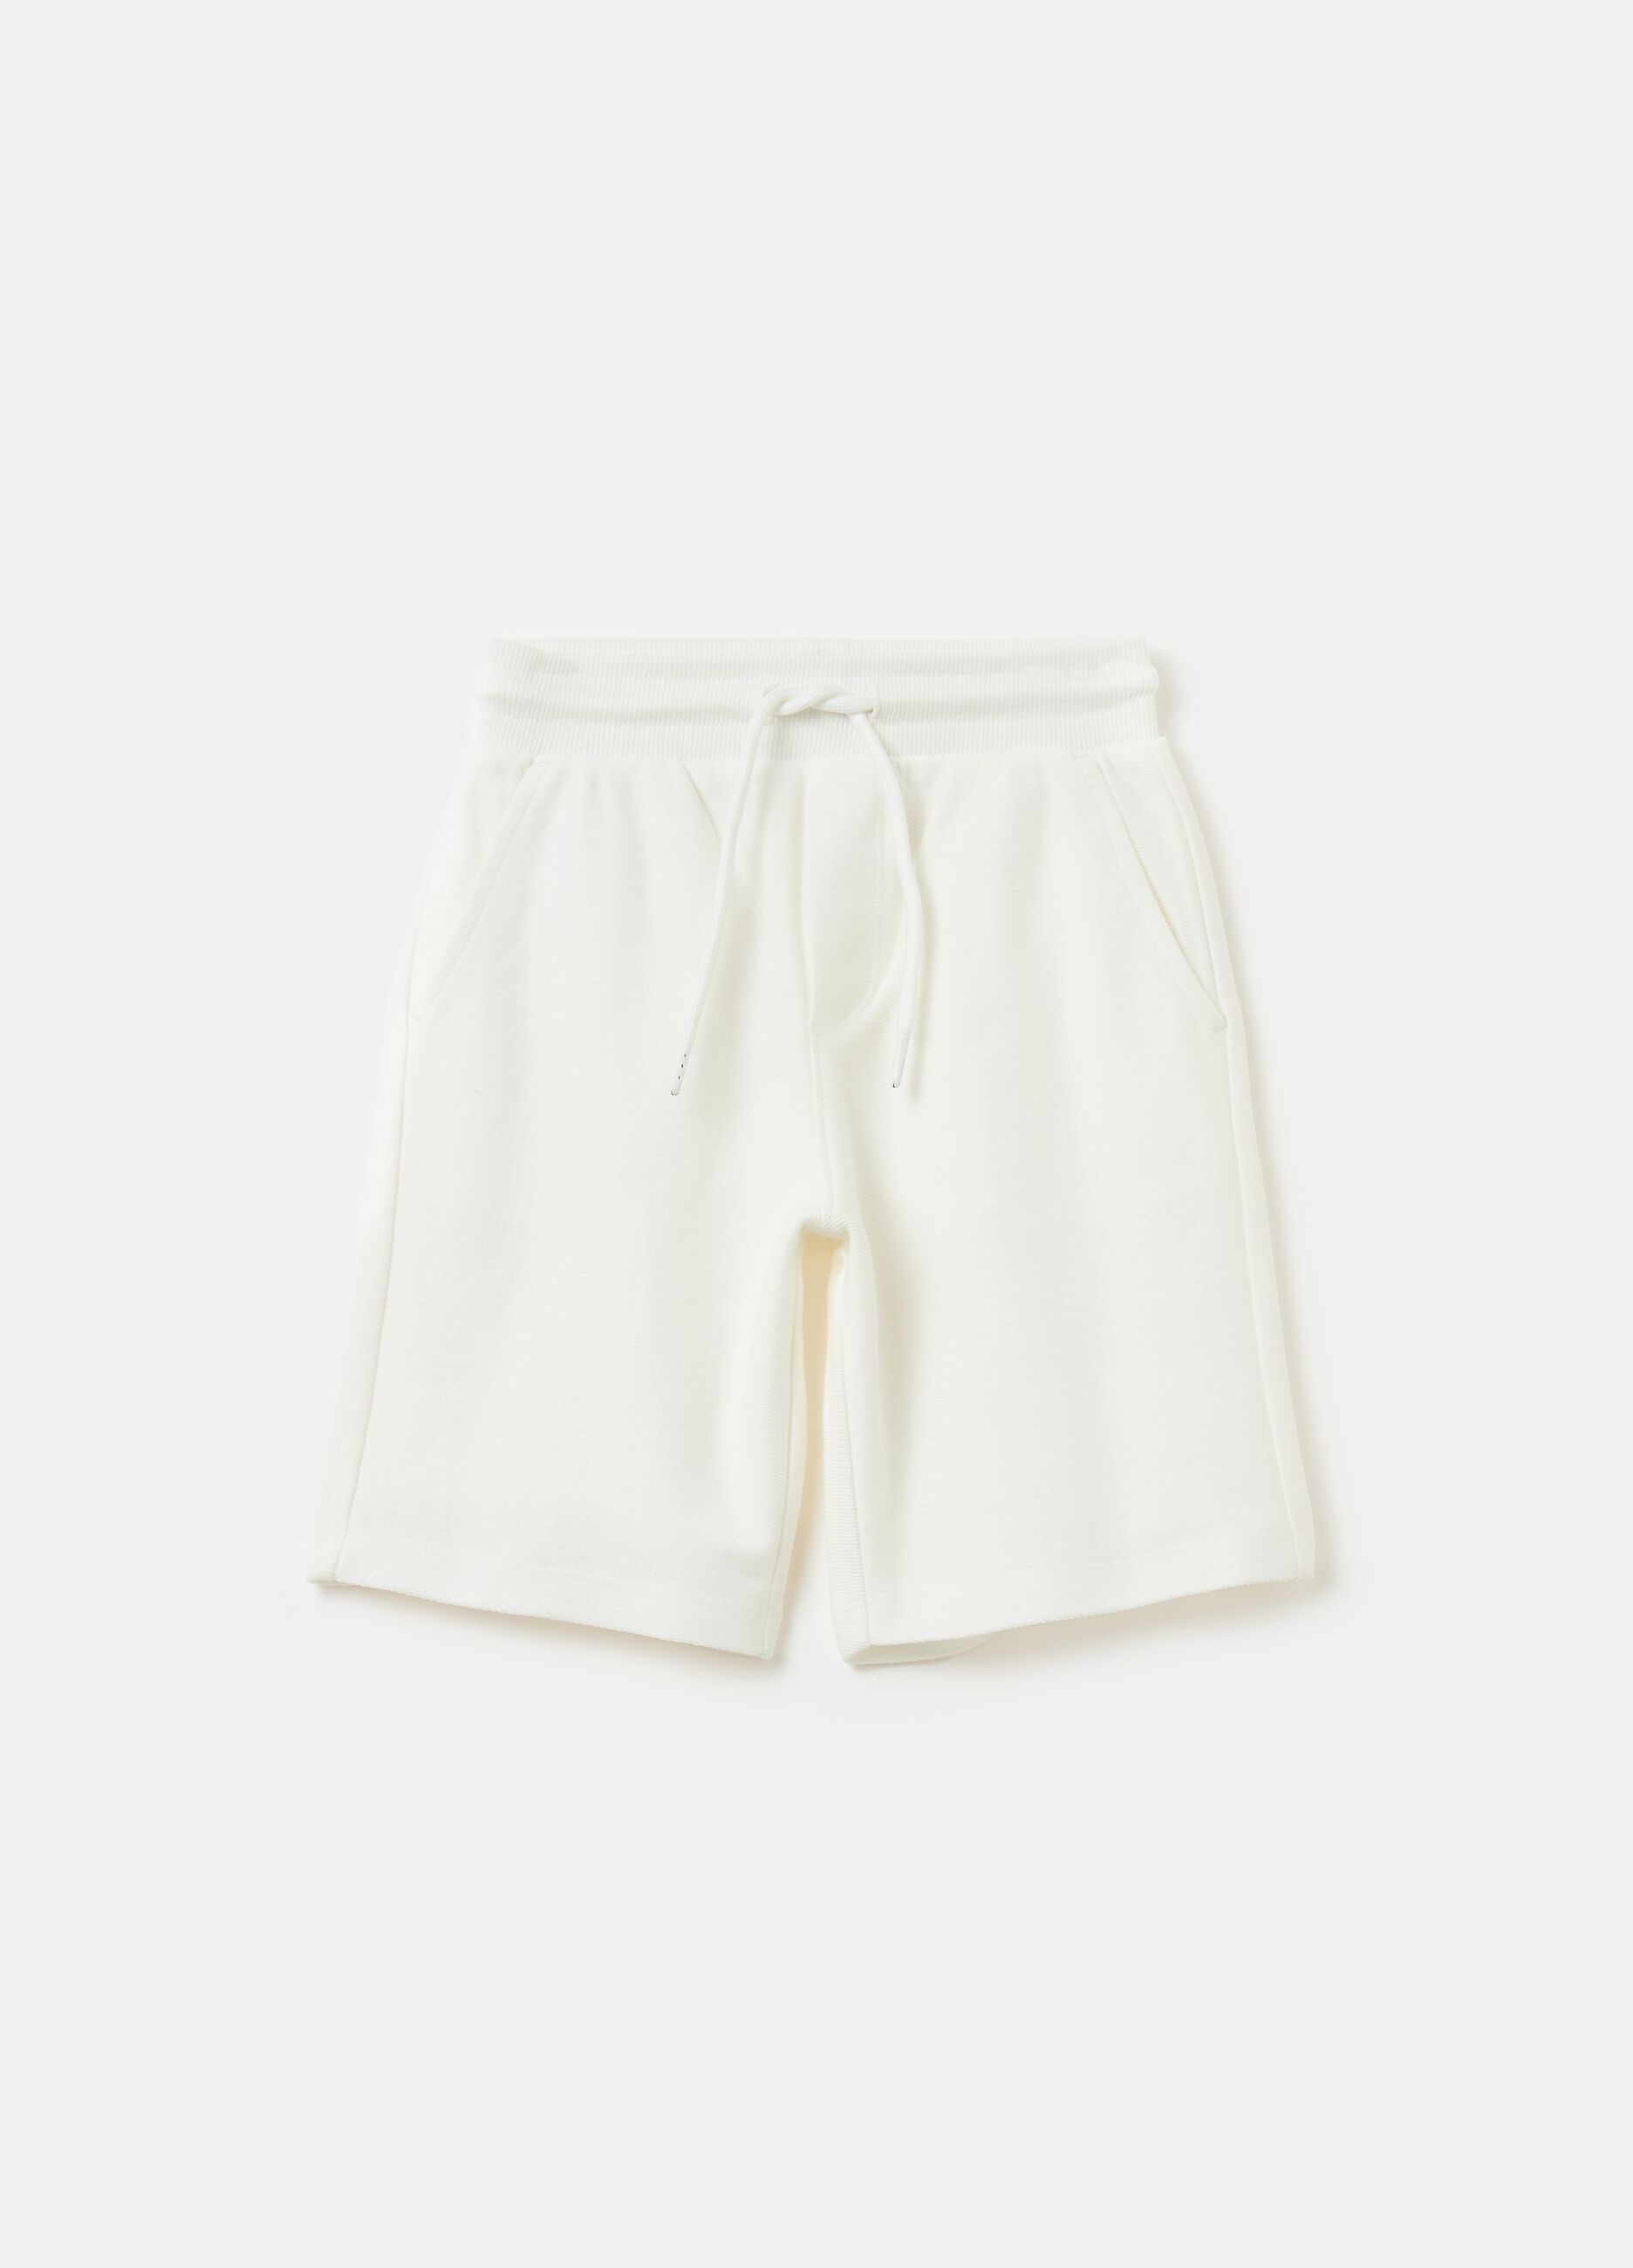 Cotton Bermuda shorts with striped weave